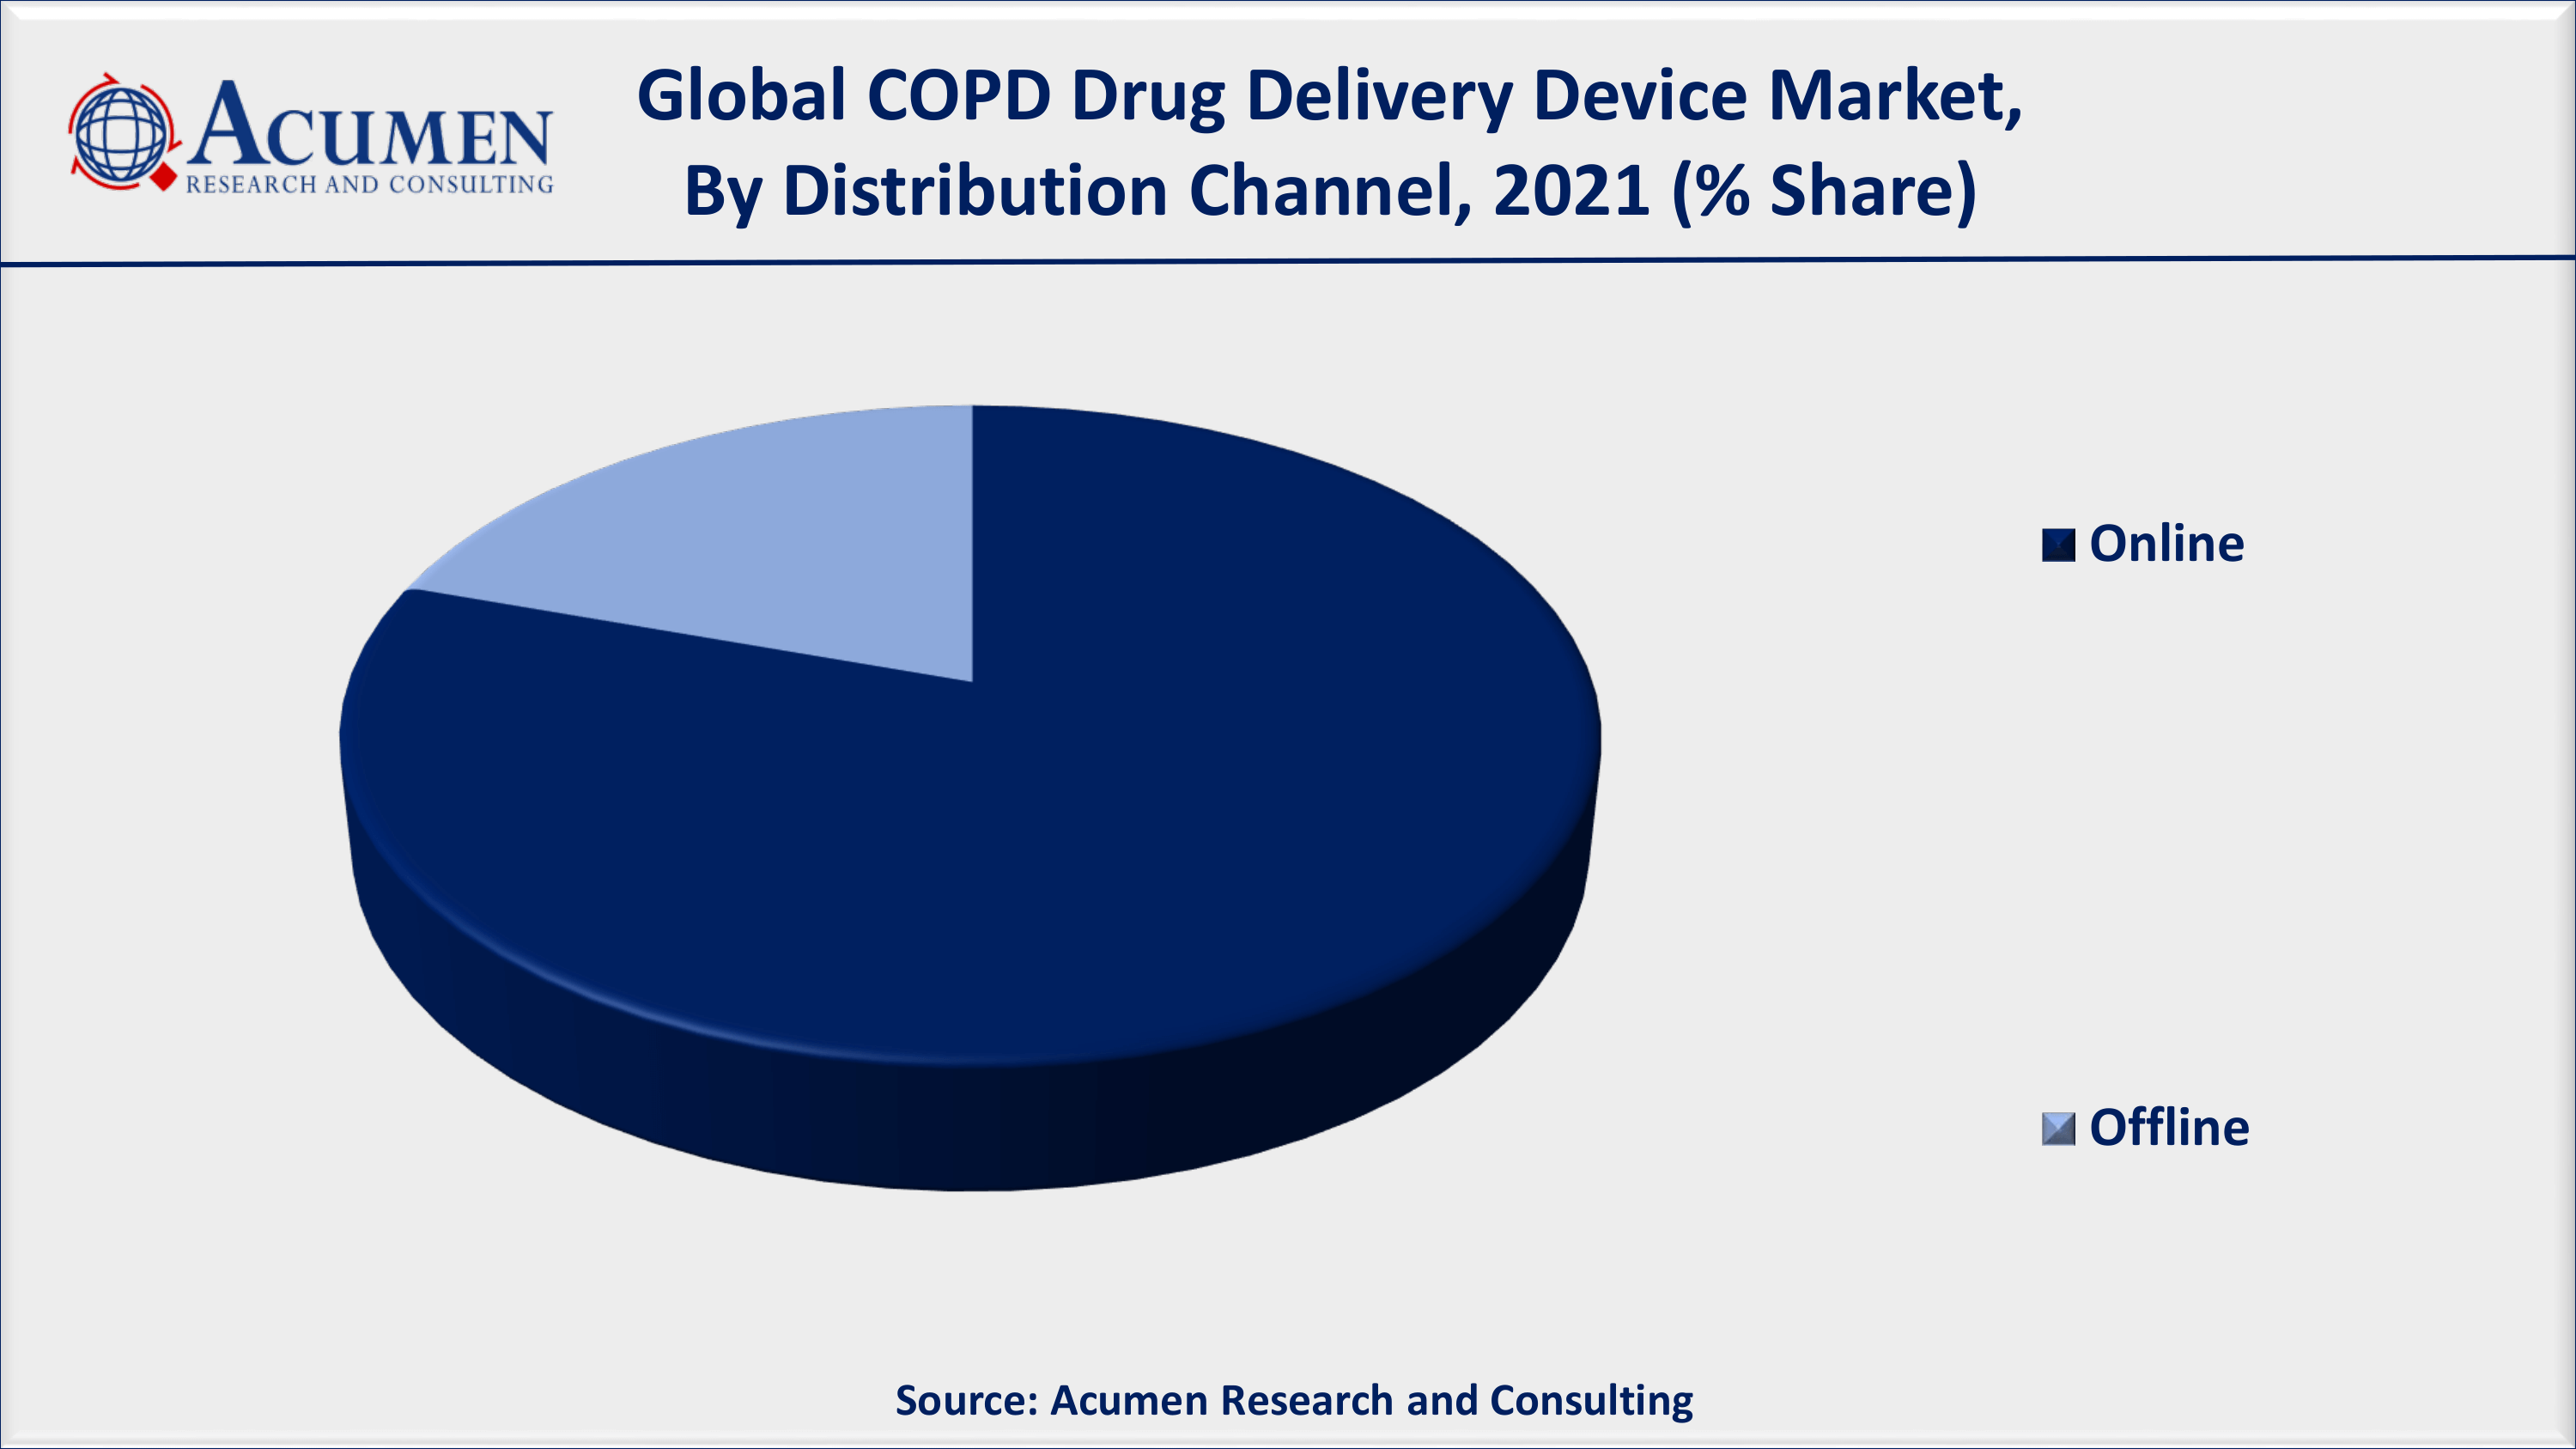 COPD Drug Delivery Devices Market to 2030 - Forecast and Competitive Analysis